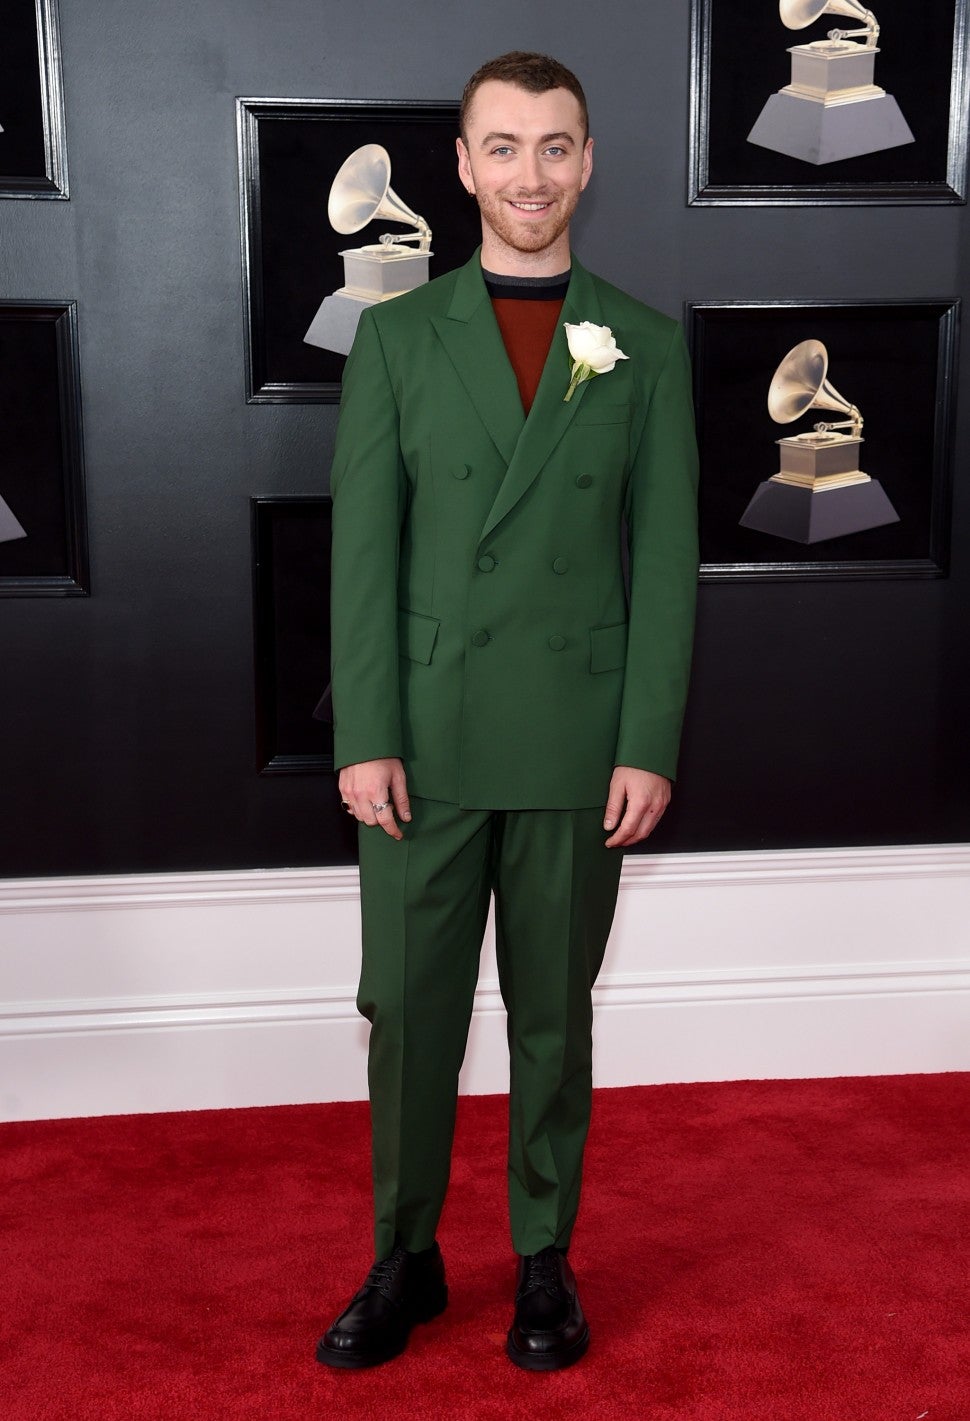 sam_smith_gettyimages-911504202.jpg 